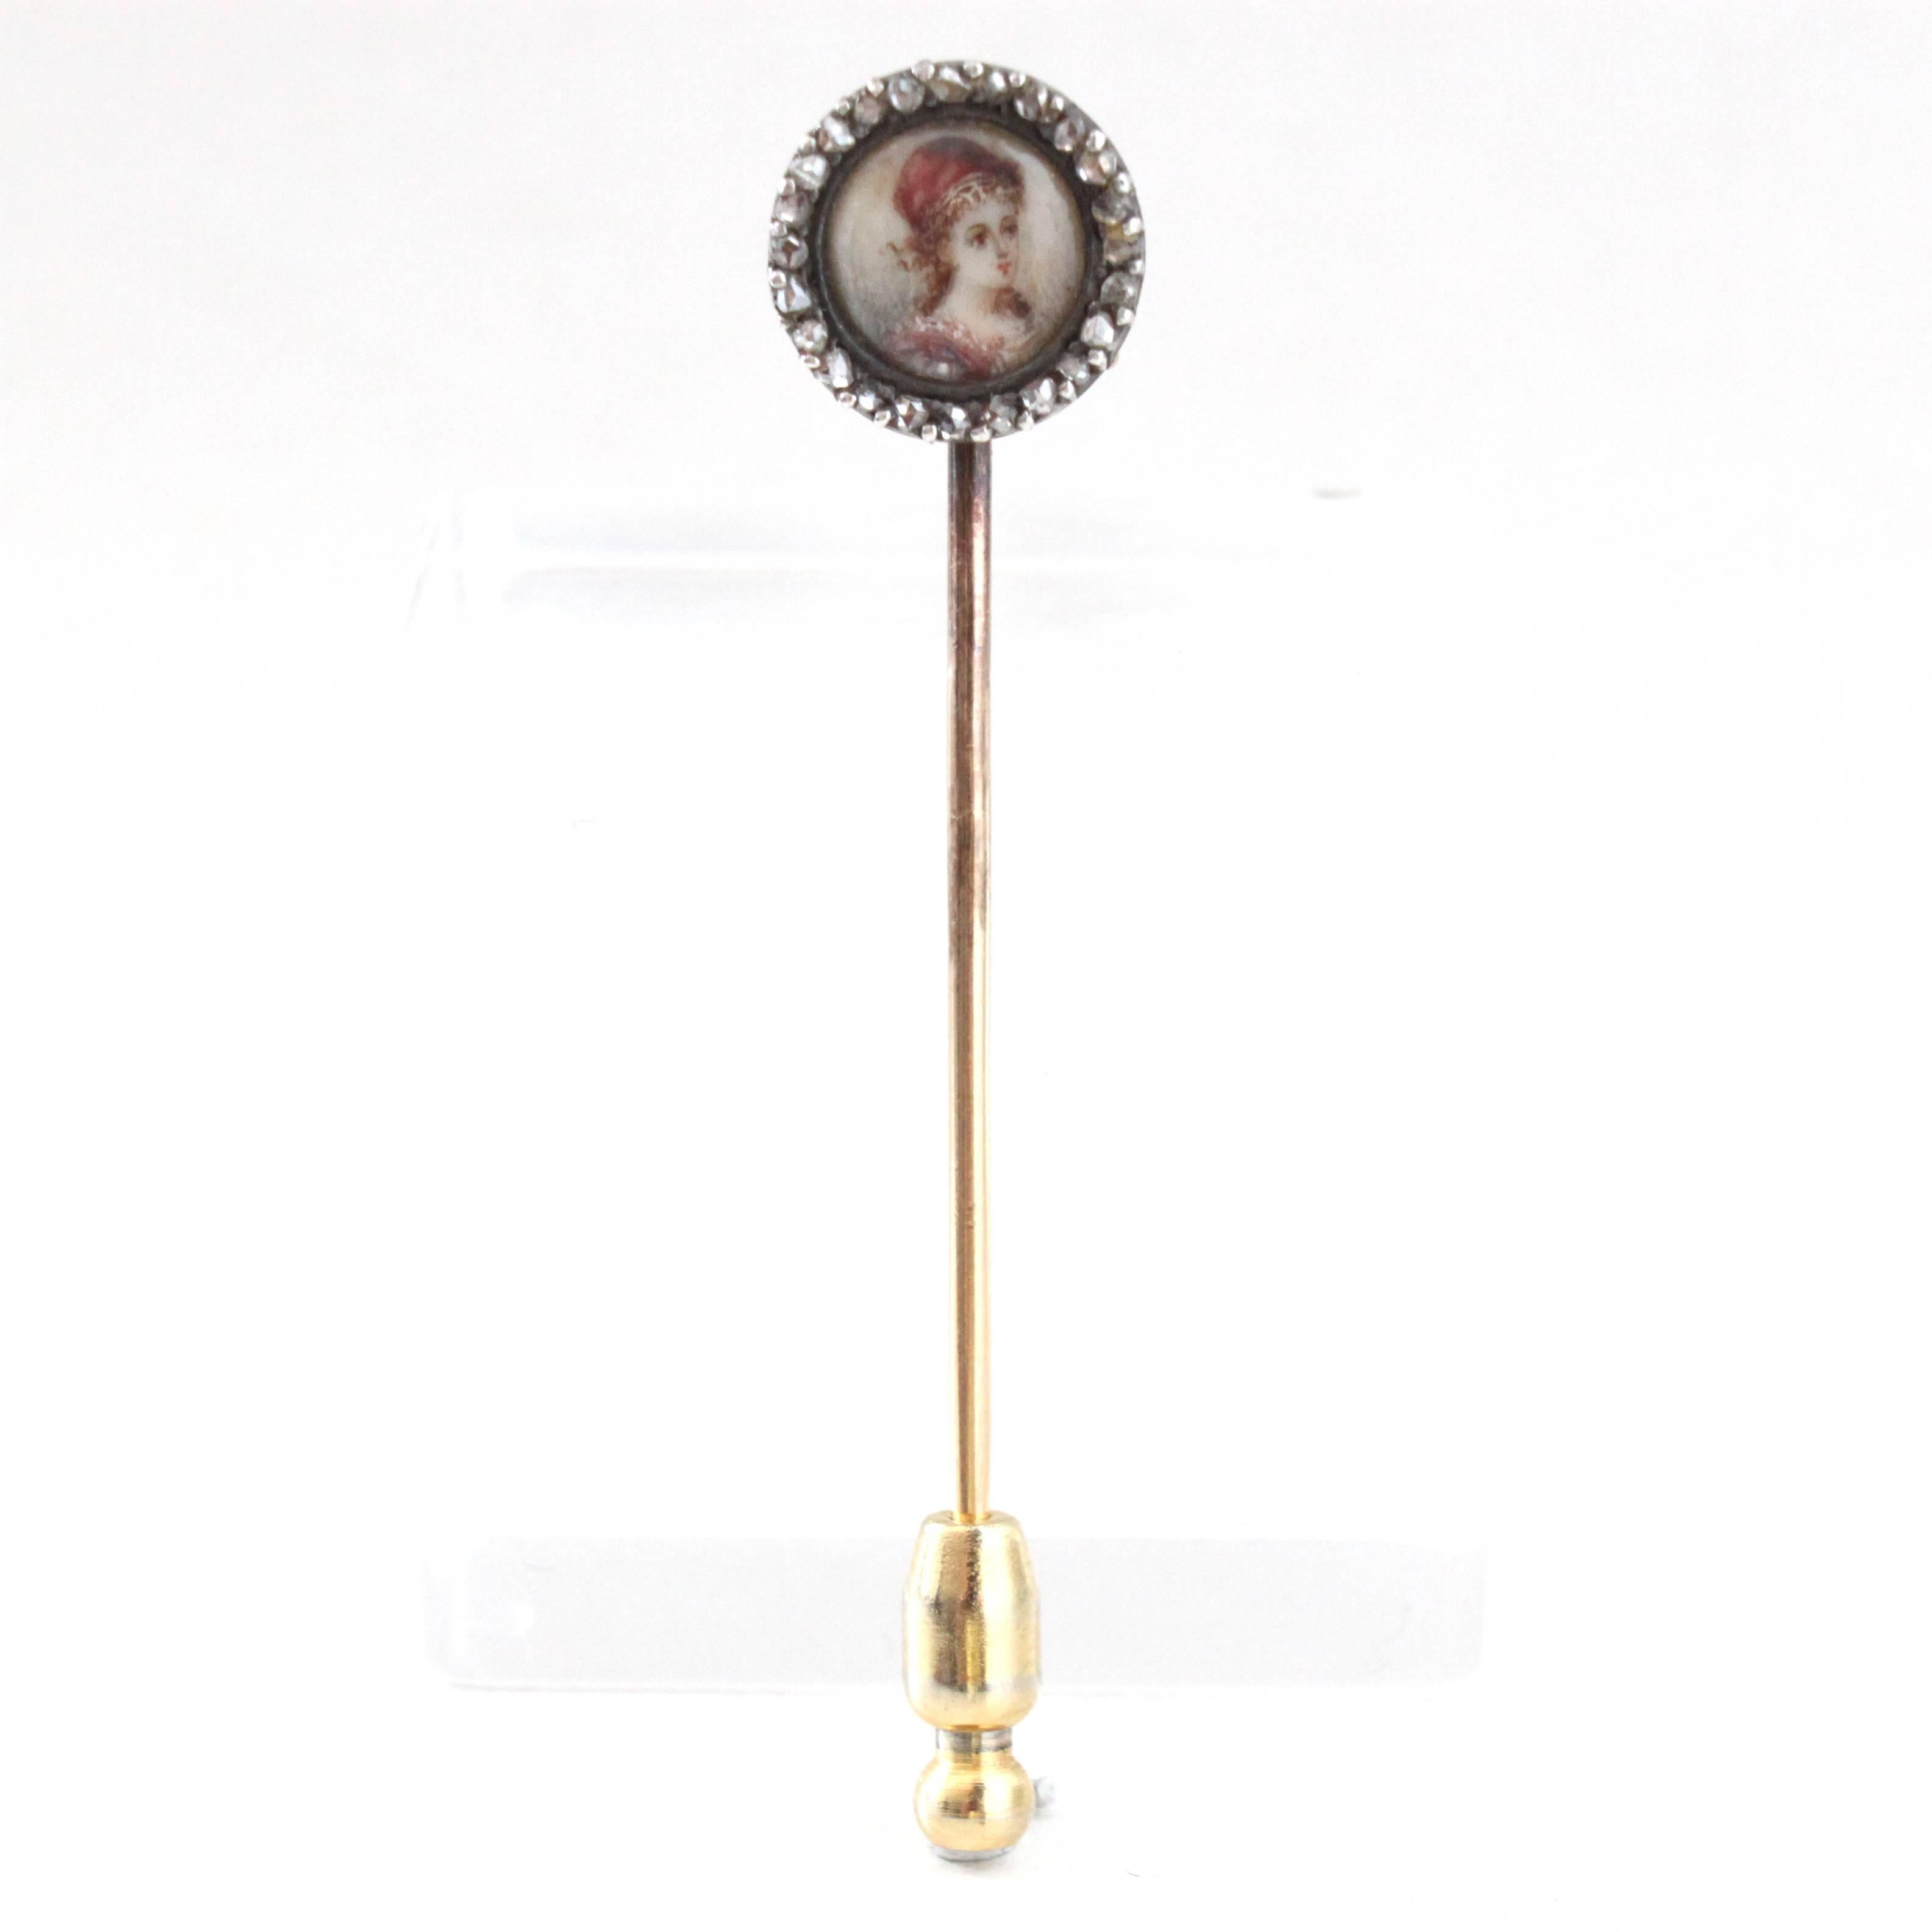 A Victorian Diamond and Enamel Portrait Stick Pin, ca. 1890s.

The centre piece portraits a maiden in enamel work, surrounded by rose-cut diamonds.